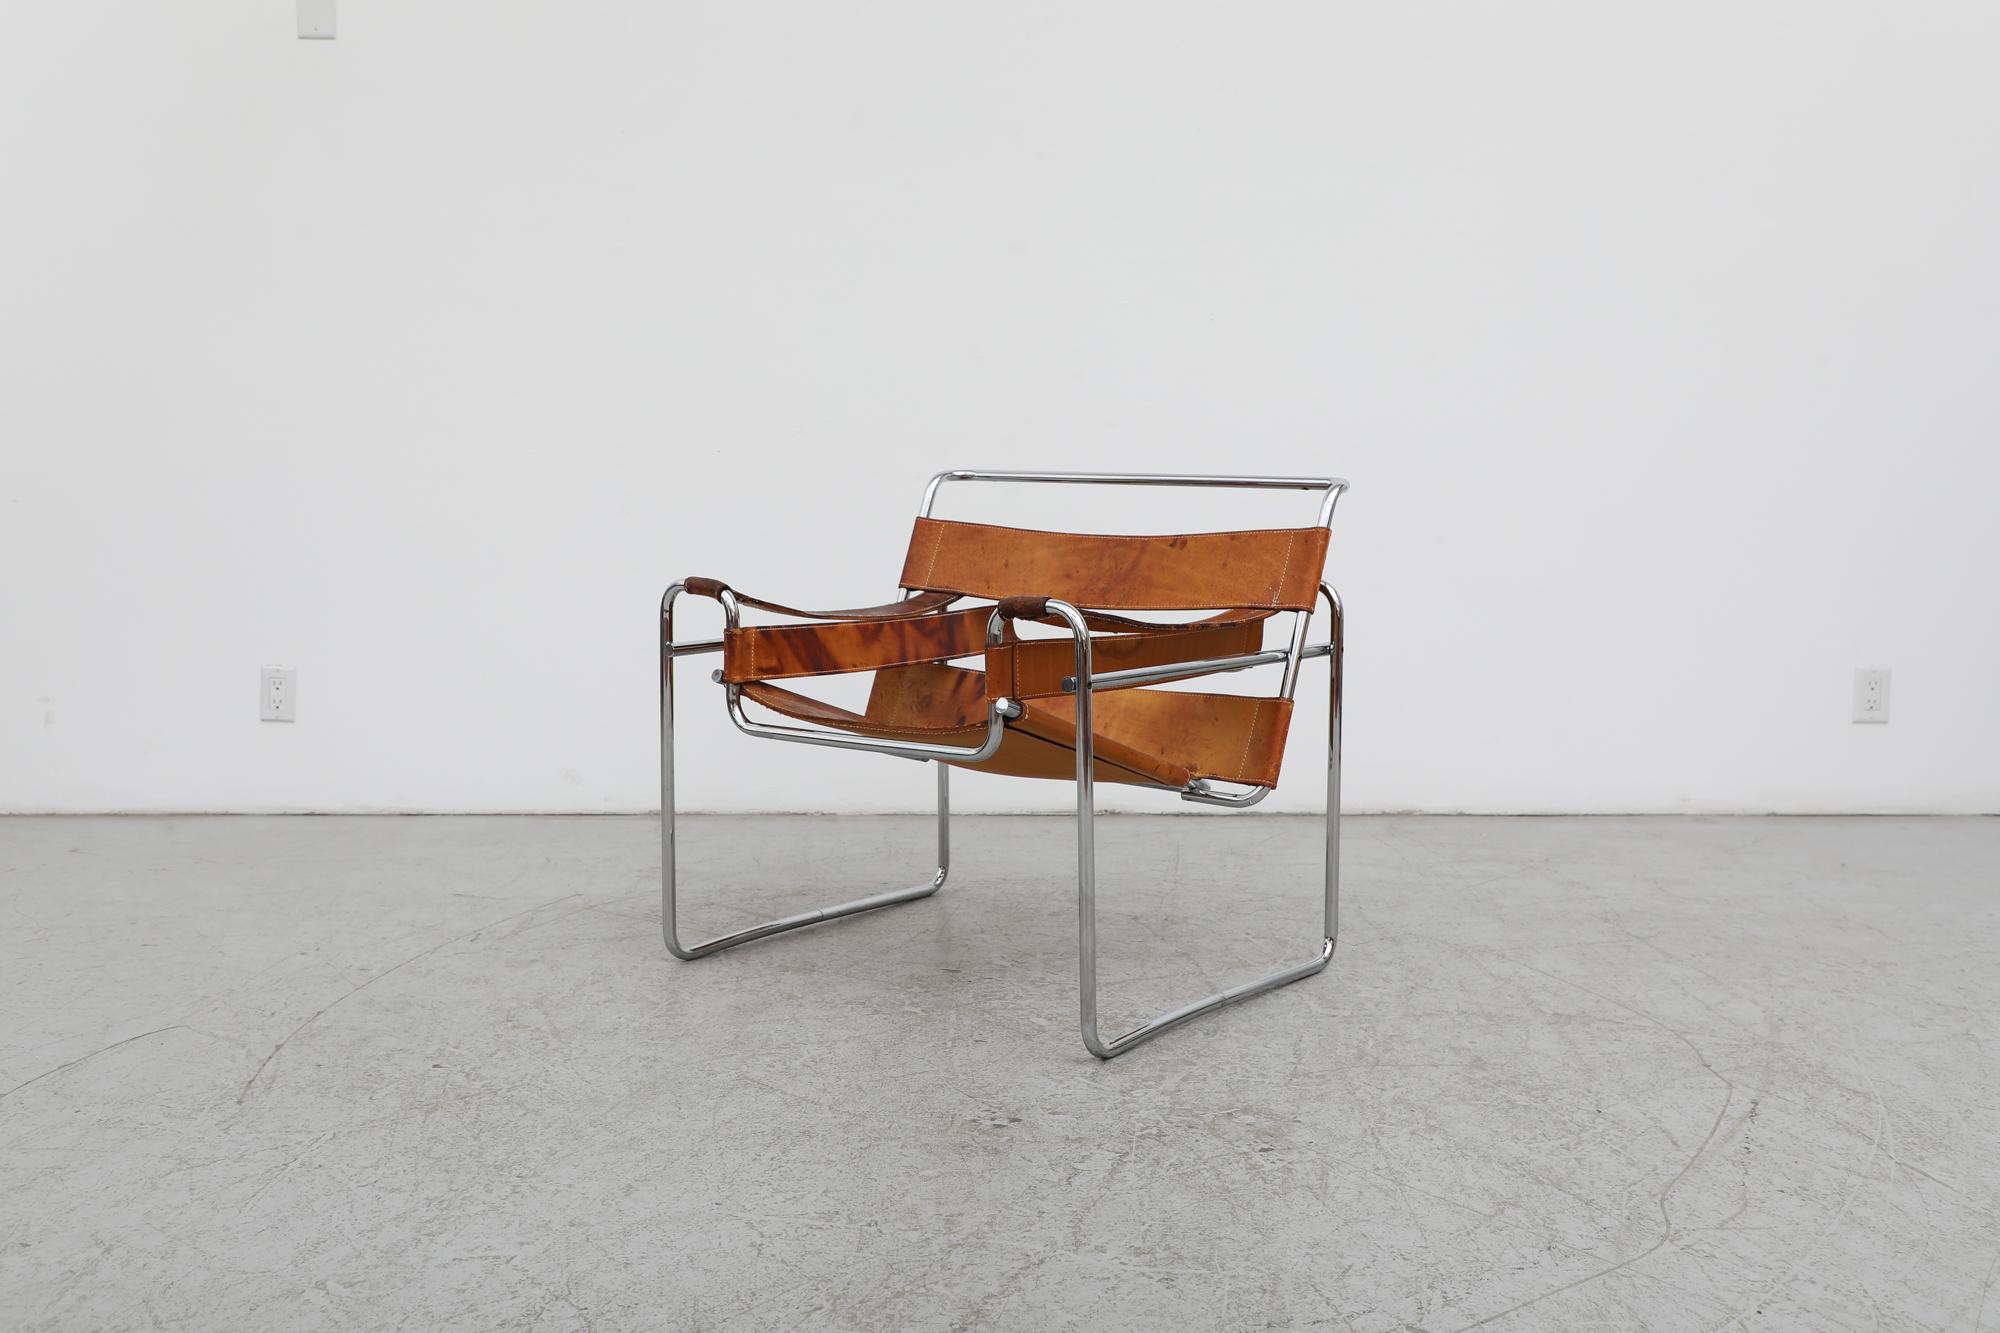 Natural Leather 'Wassily' Chair by Marcel Breuer for Gavina. Originally designed in 1925. This model was produced in Italy for Gavina, 1960's. Beautifully crafted leather and chrome frame lounge chair created a thought provoking design based on the